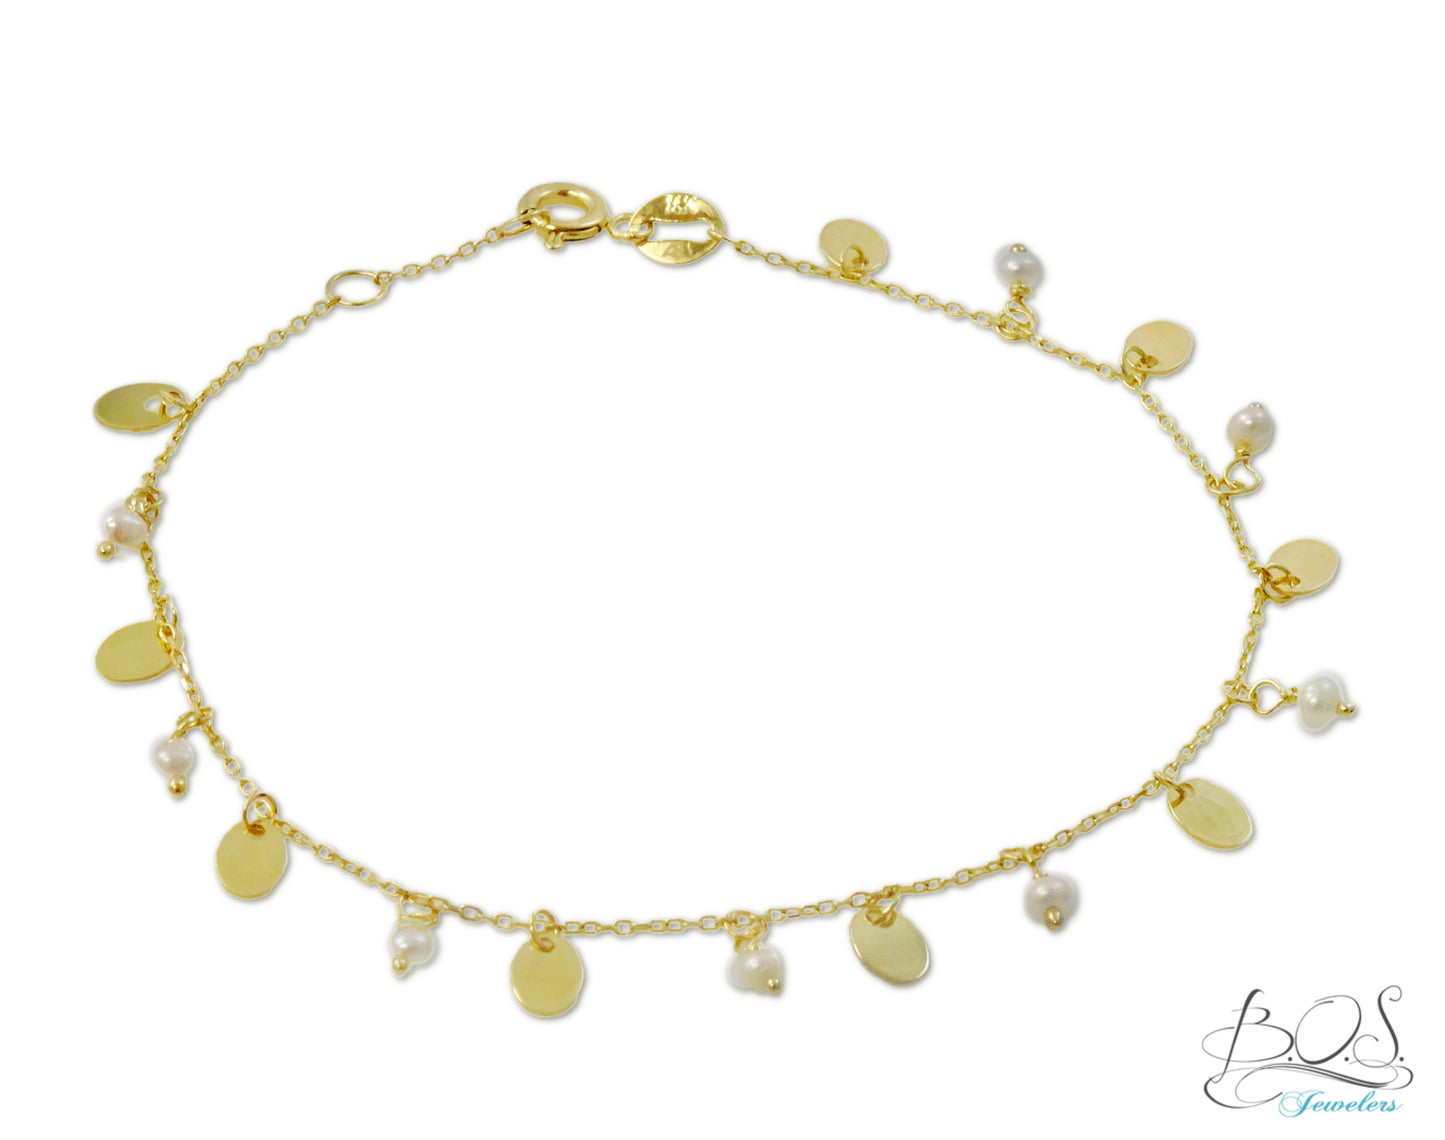 14K Gold Multi Oval Charms and Pearls Bracelet